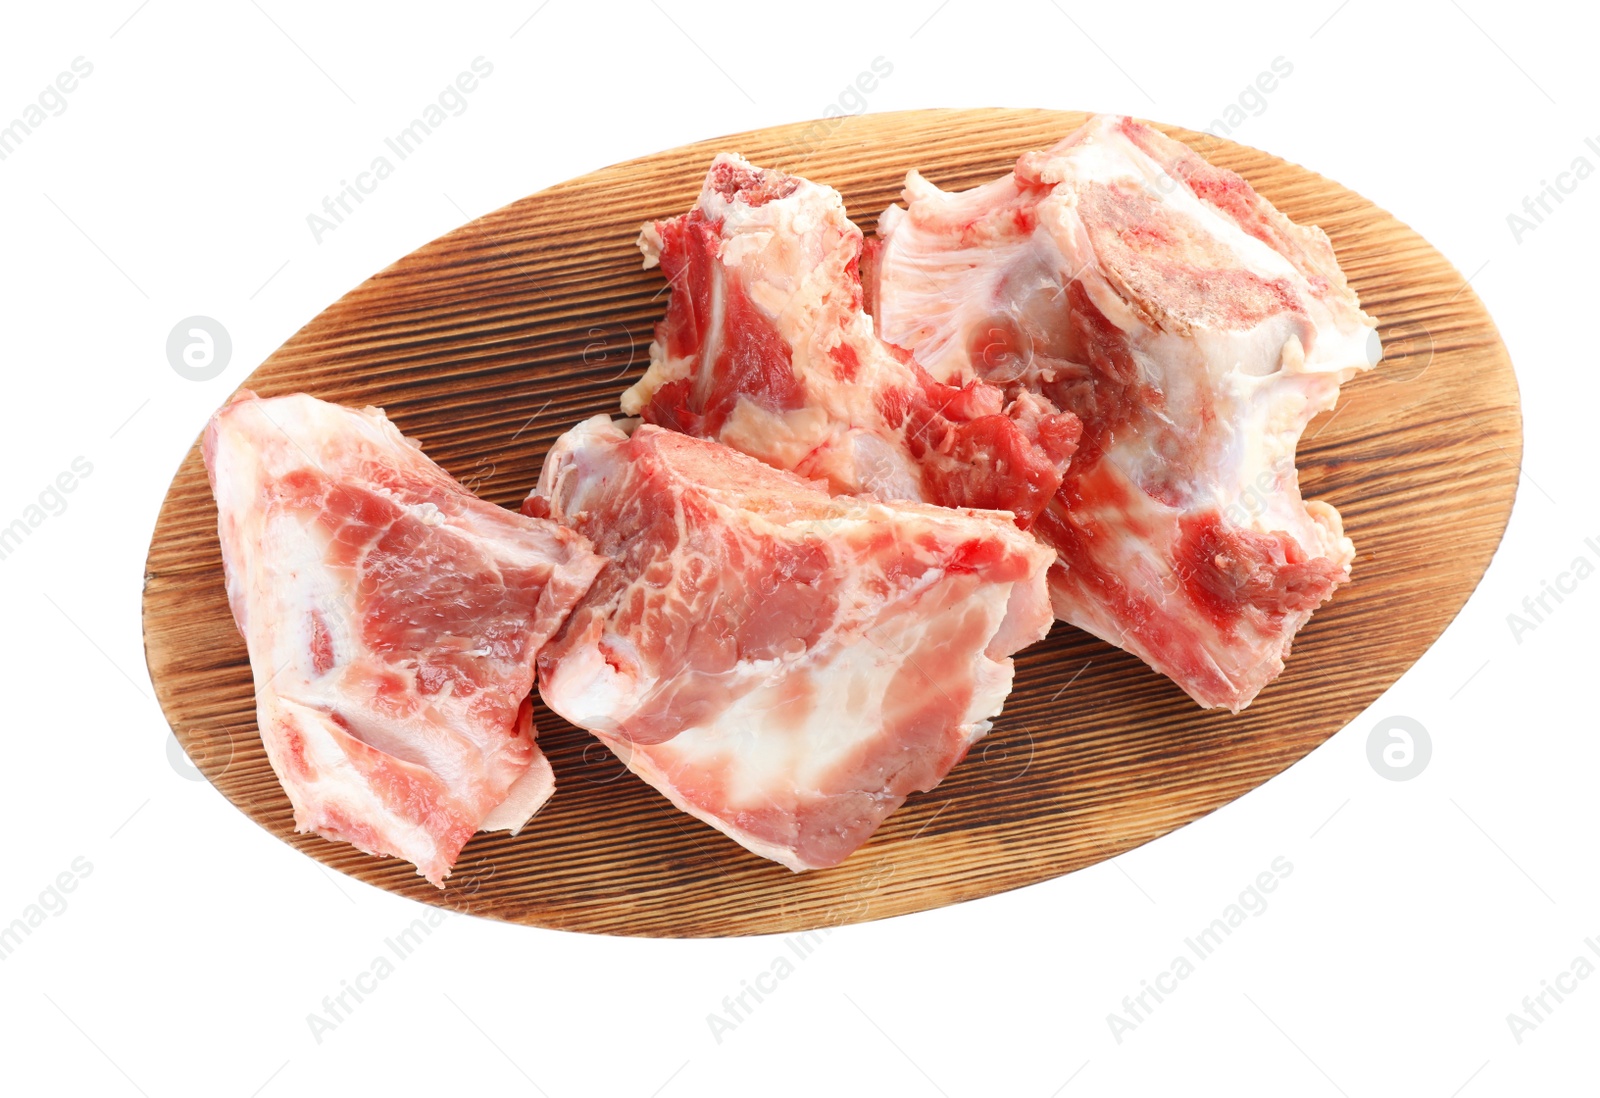 Photo of Wooden board with raw chopped meaty bones on white background, top view